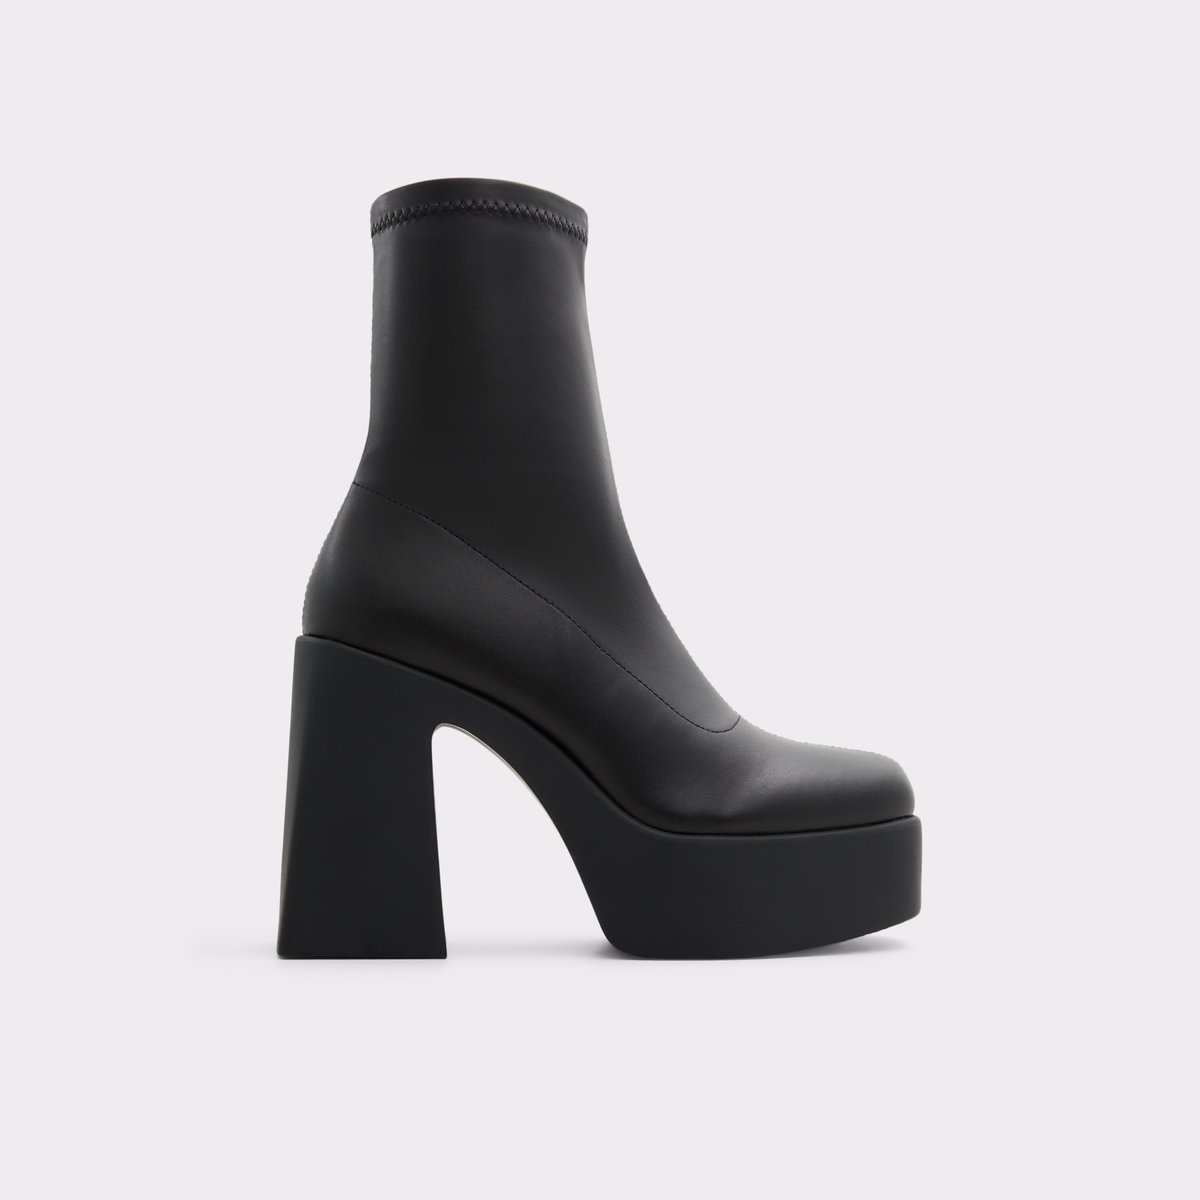 Grandstep Black Synthetic Stretch Women's Ankle boots | ALDO Canada